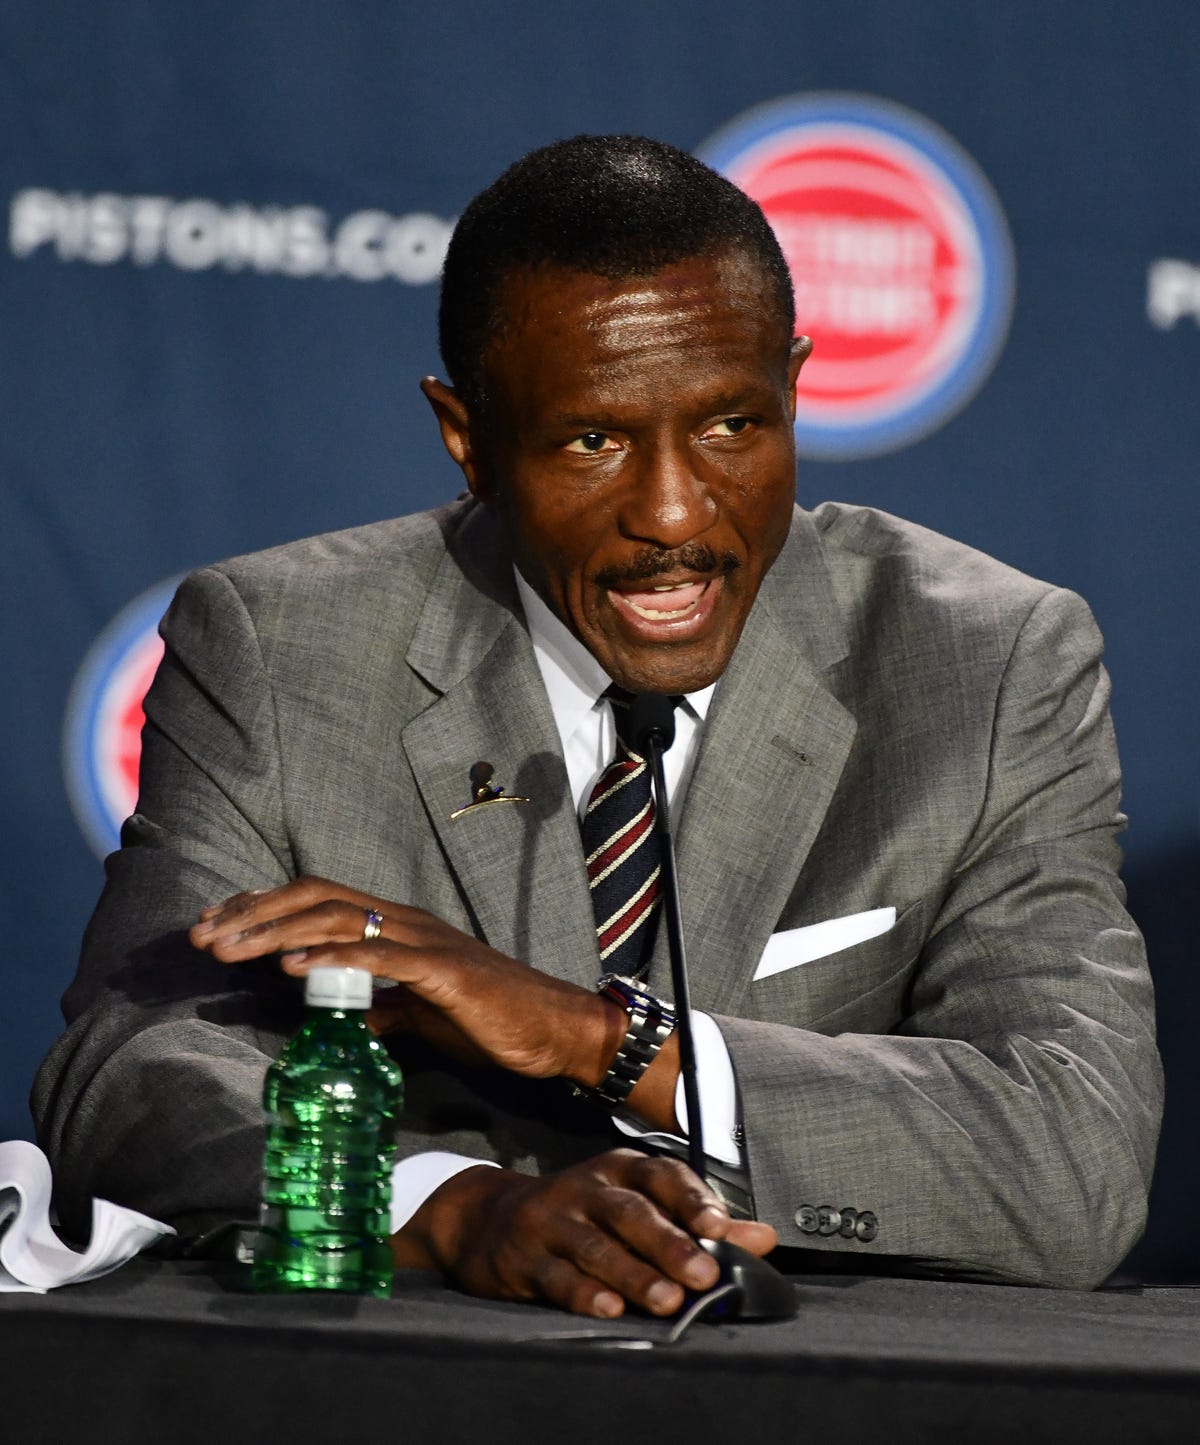 Pistons' Dwane Casey overcame scandal that threatened coaching career